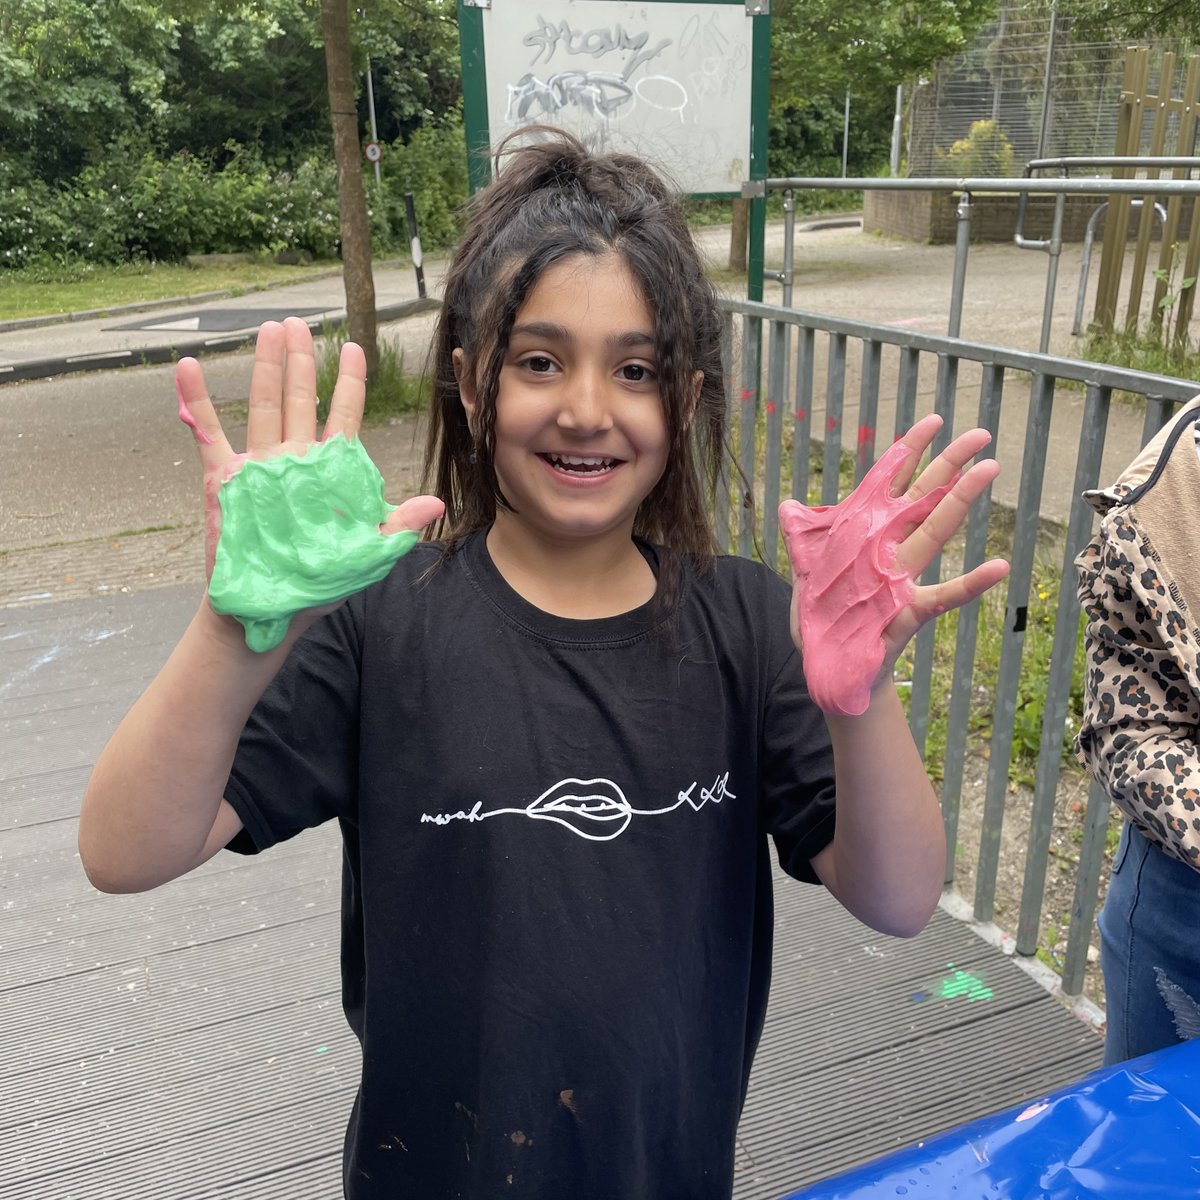 Slime!!!! 😀 #halfterm #halftermfun #halftermactivities

#FunComesFirst #islington #adventureplayground #playwork #playmatters #letthemplay #londonplaygrounds #adventureplay #freeplay #outdoorplay #openendedplay #loosepartsplay #treehouse #childledplay #riskyplay #righttoplay